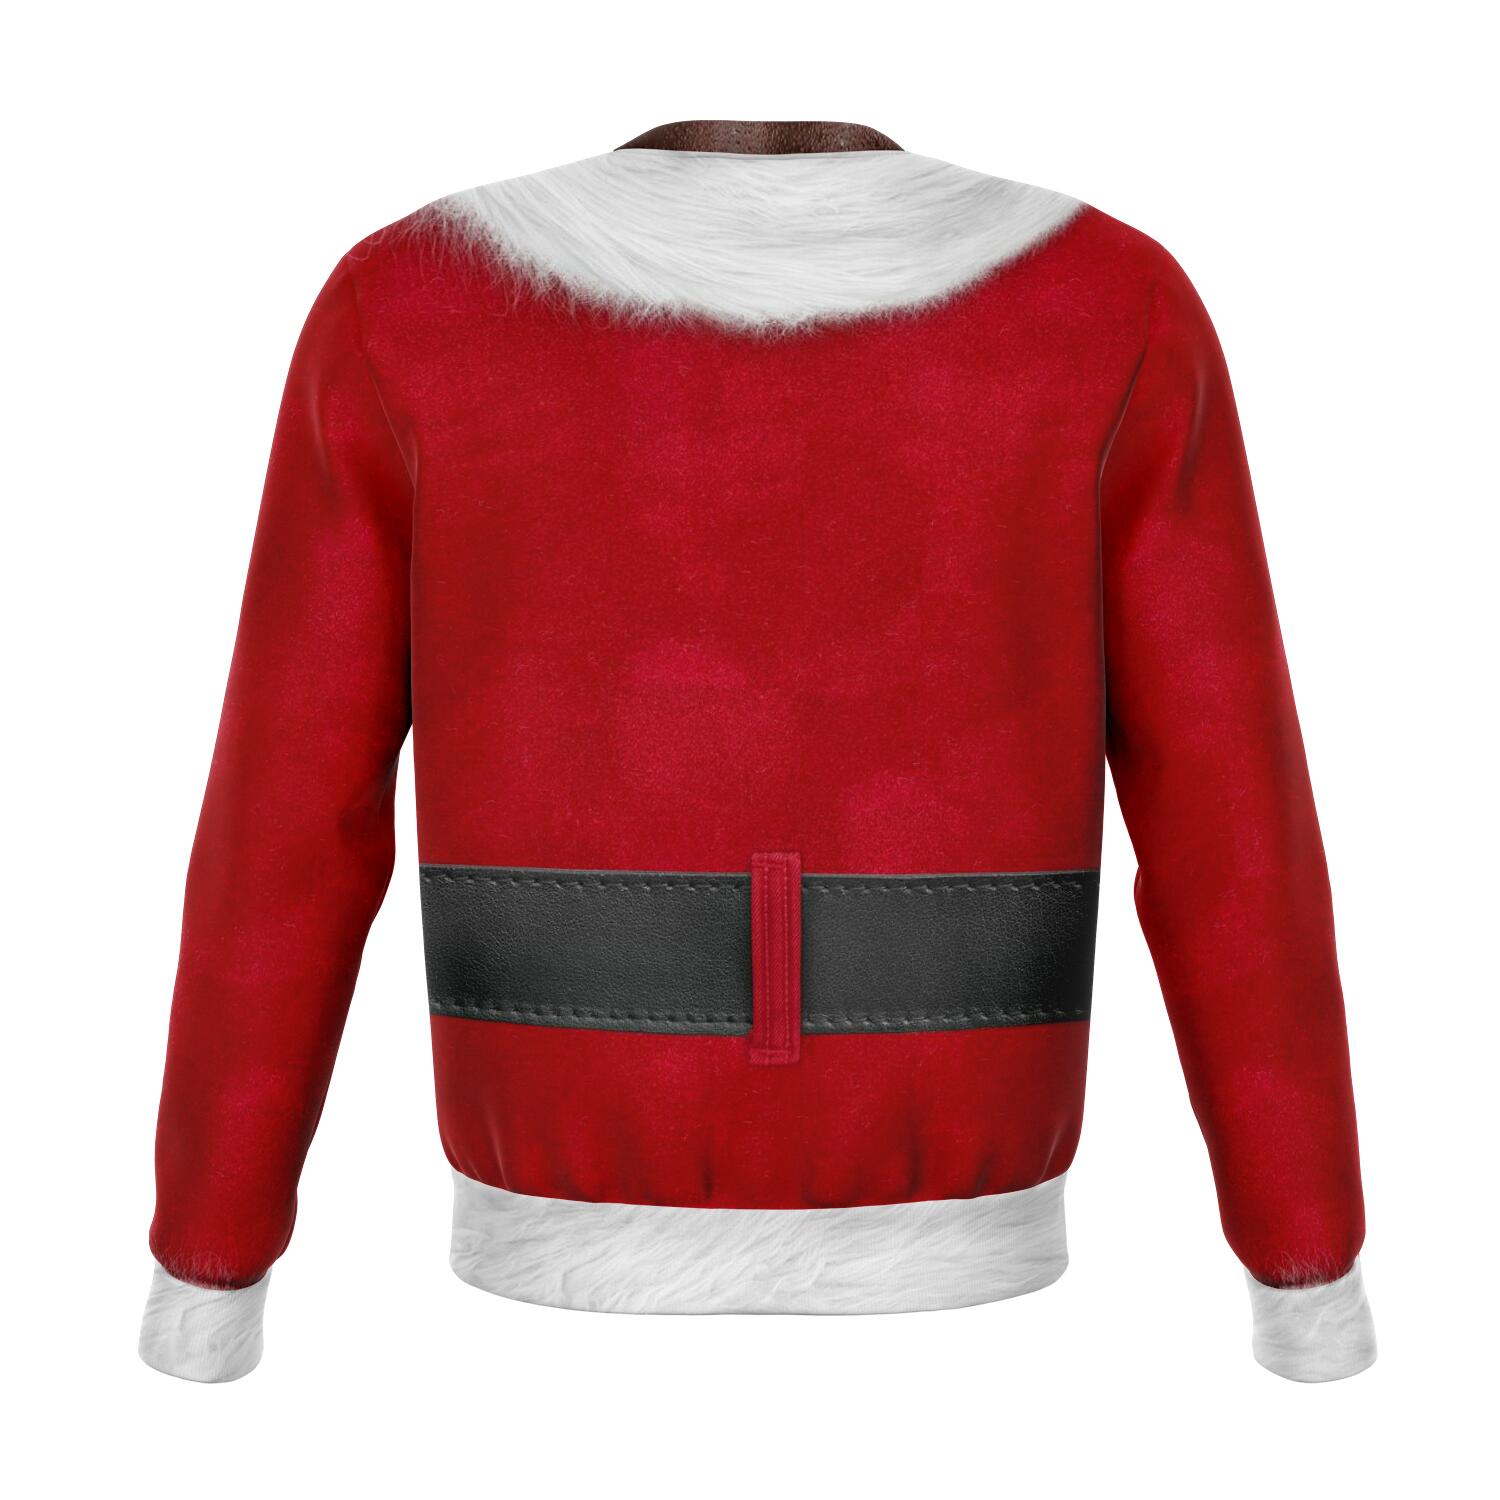 Santa Muscle Ugly Christmas Sweater Order By December 5 - Powderaddicts